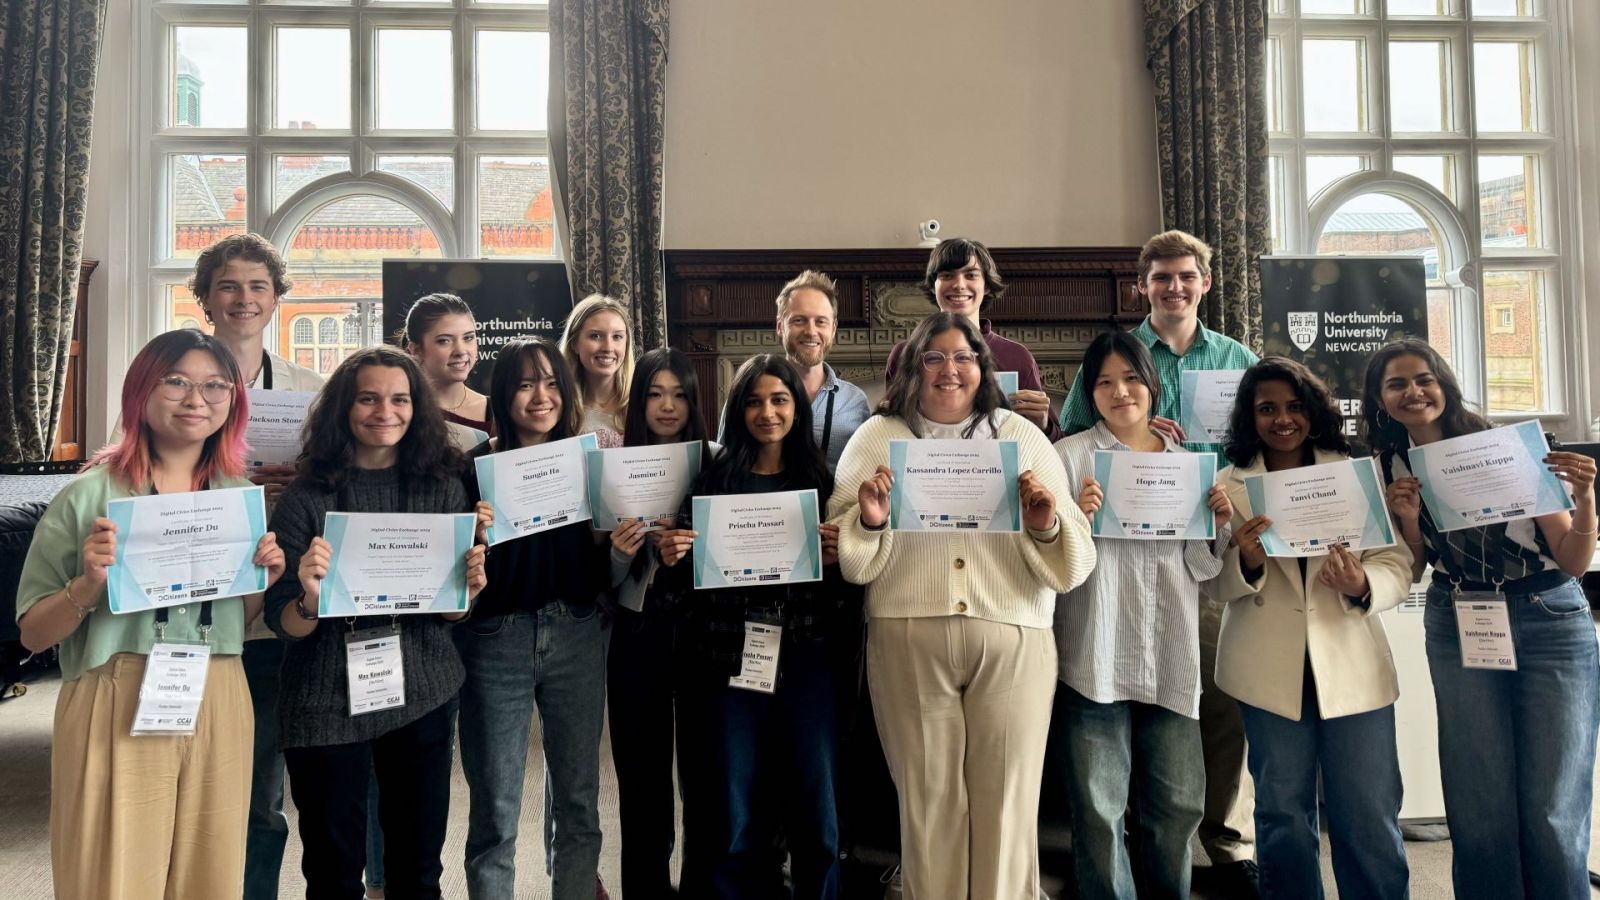 Parsons (center) with the Purdue student group participating in Northumbria University's Digital Civics Exchange. (Photo provided)